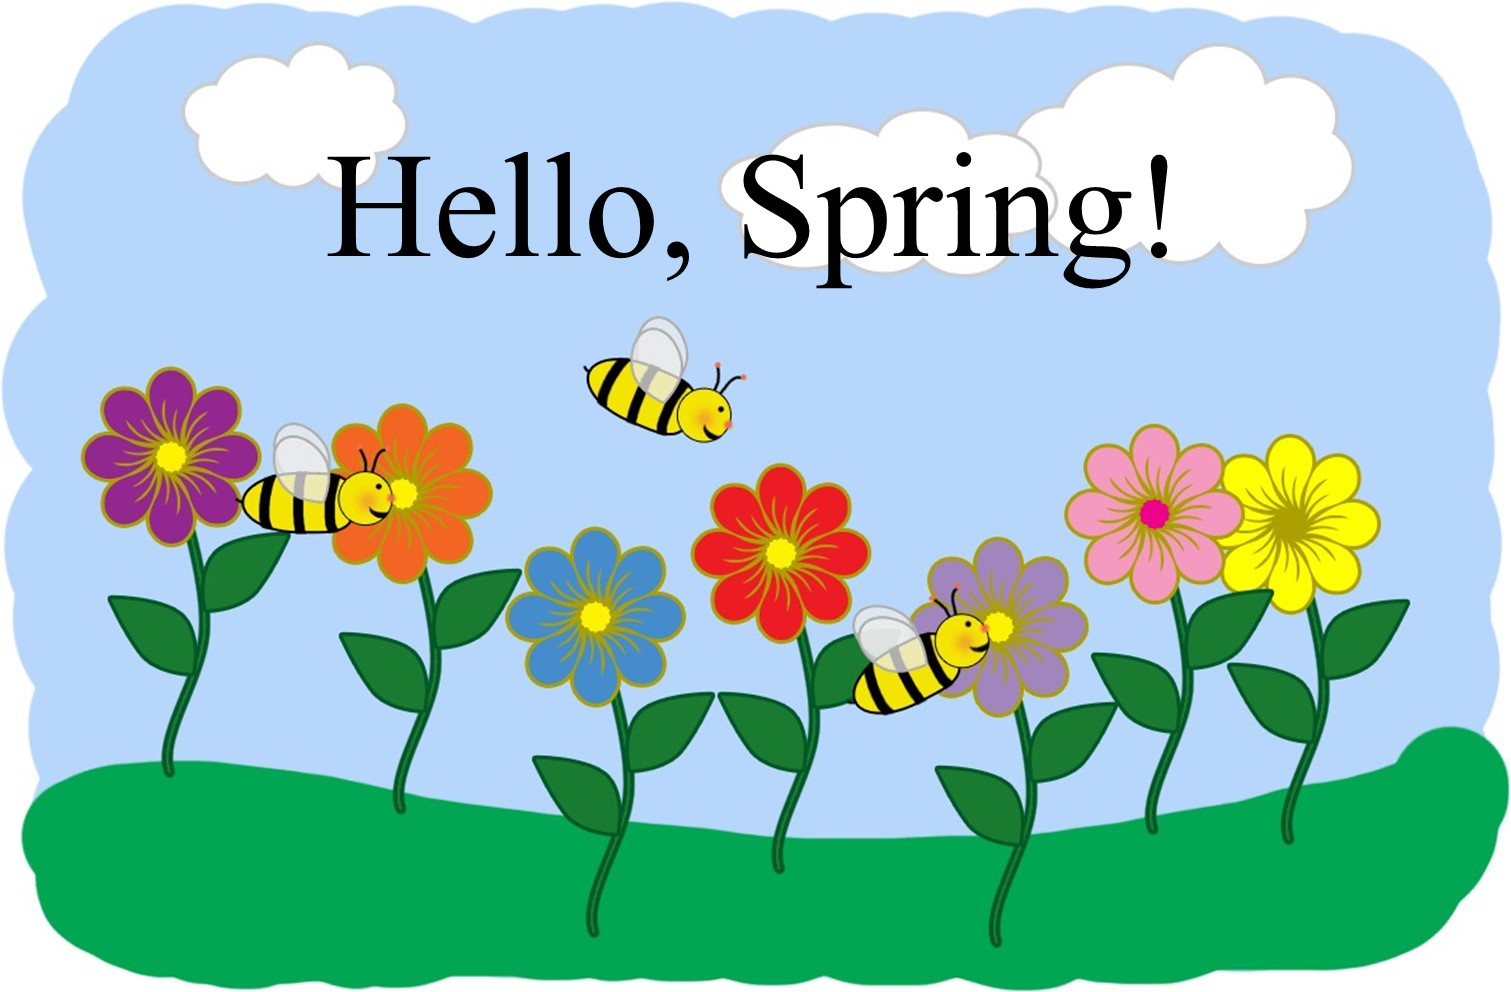 first day of spring 2022 clip art